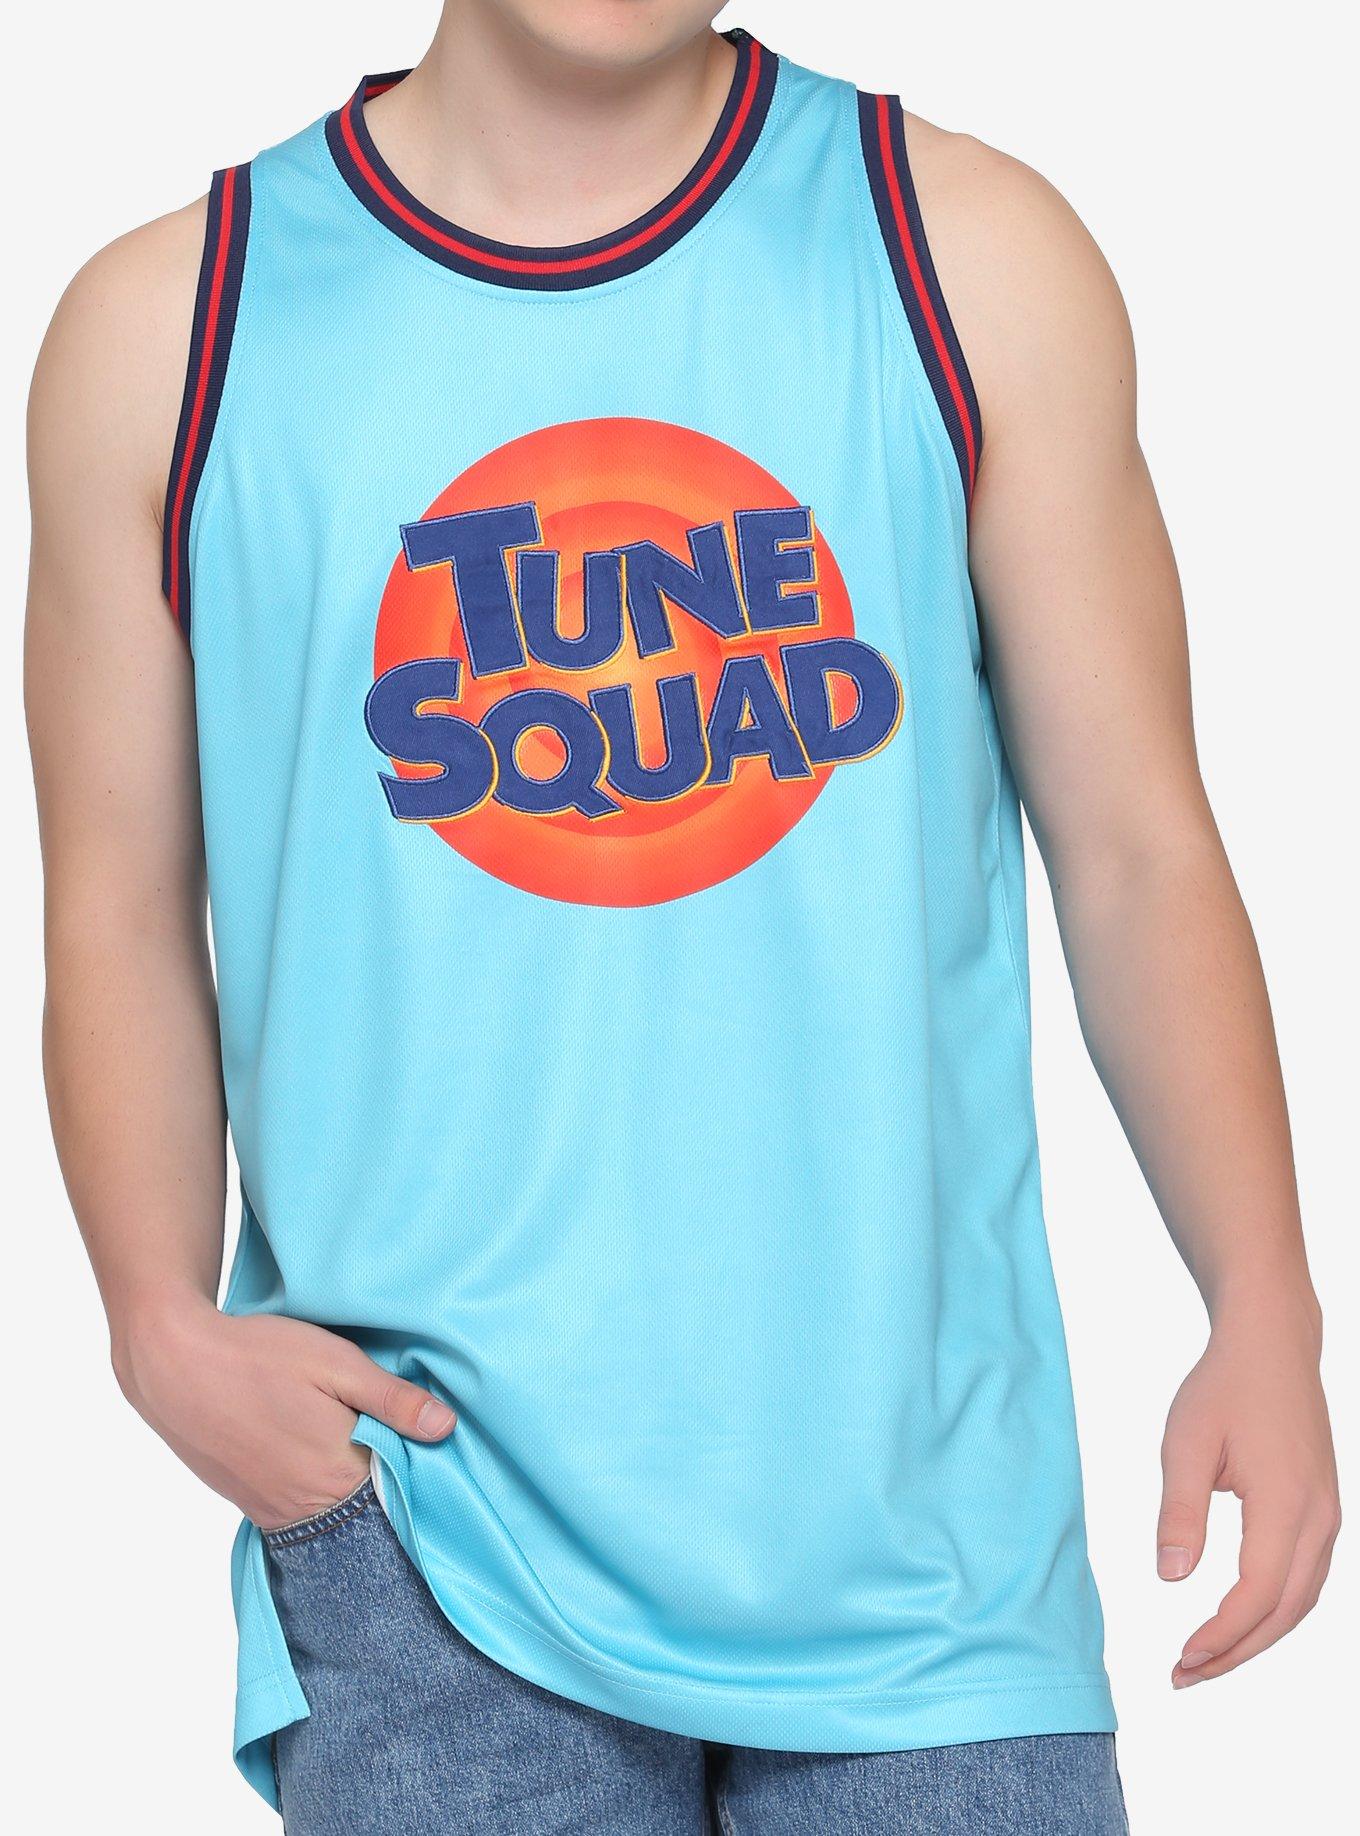 Tune Squad Jersey - Space Jam